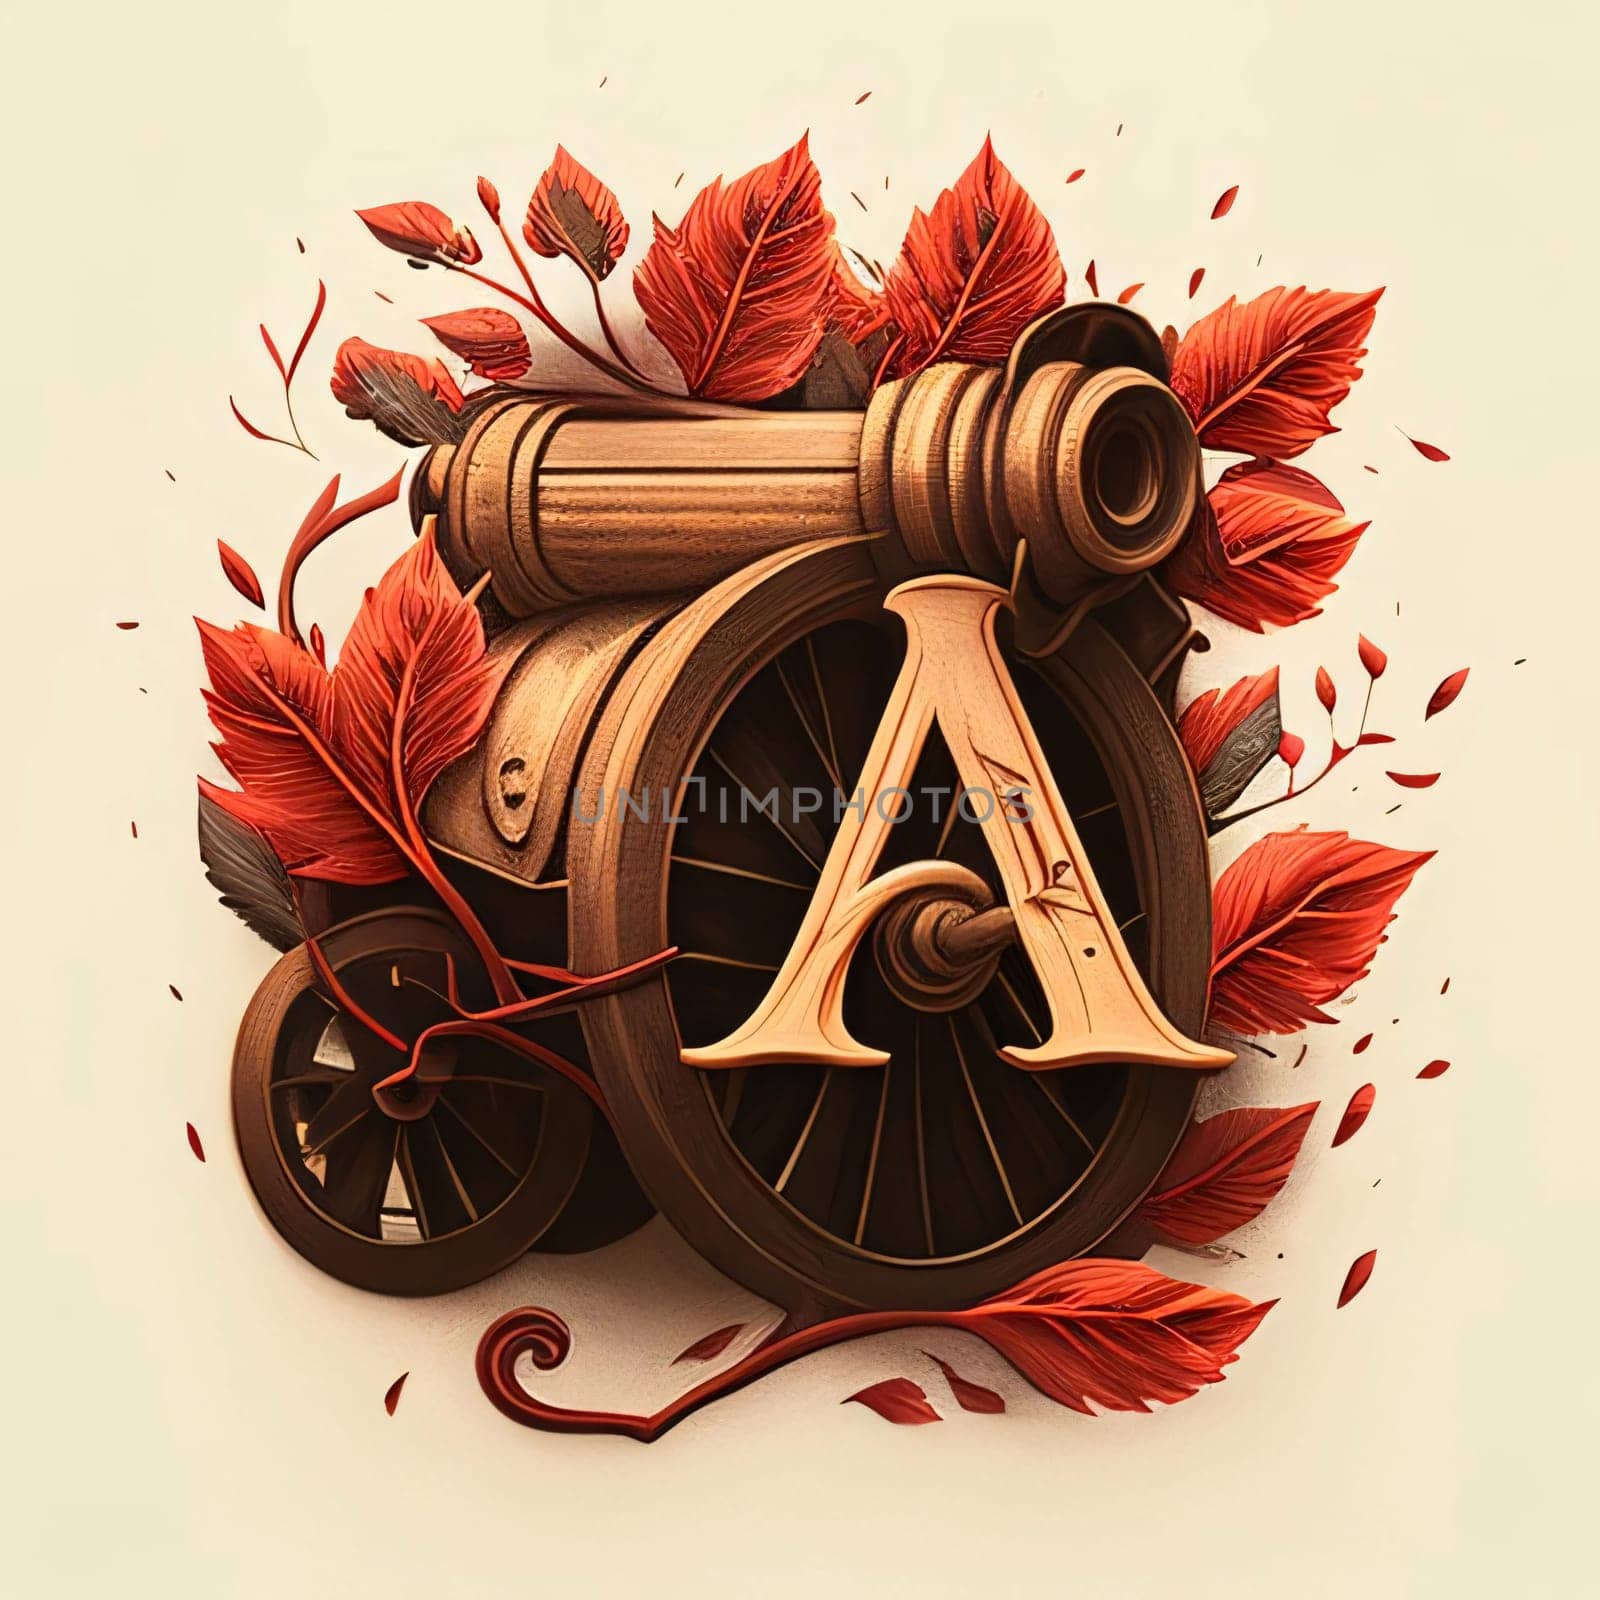 Graphic alphabet letters: Vintage alphabet letter A with a wheelbarrow and autumn leaves